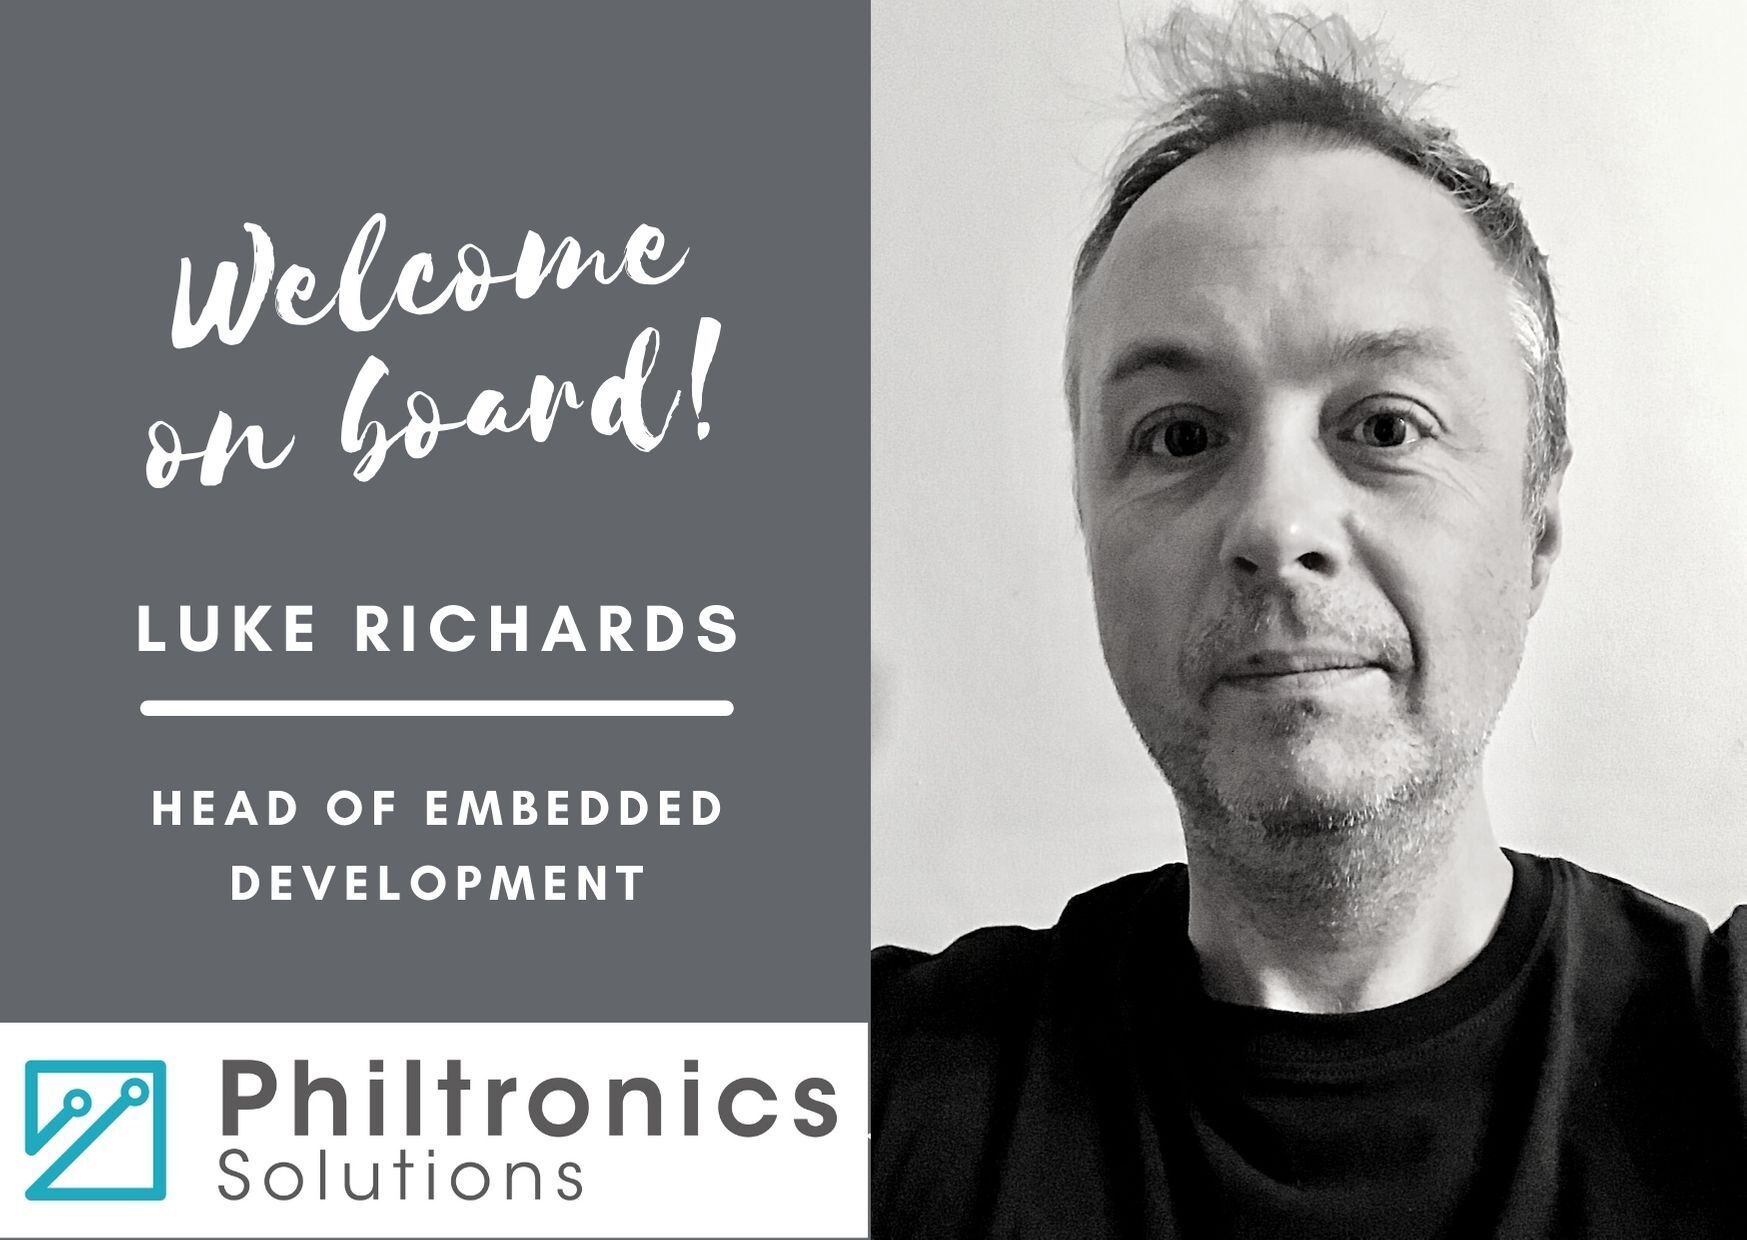 Philtronics Solutions is excited to welcome Luke Richards on board!